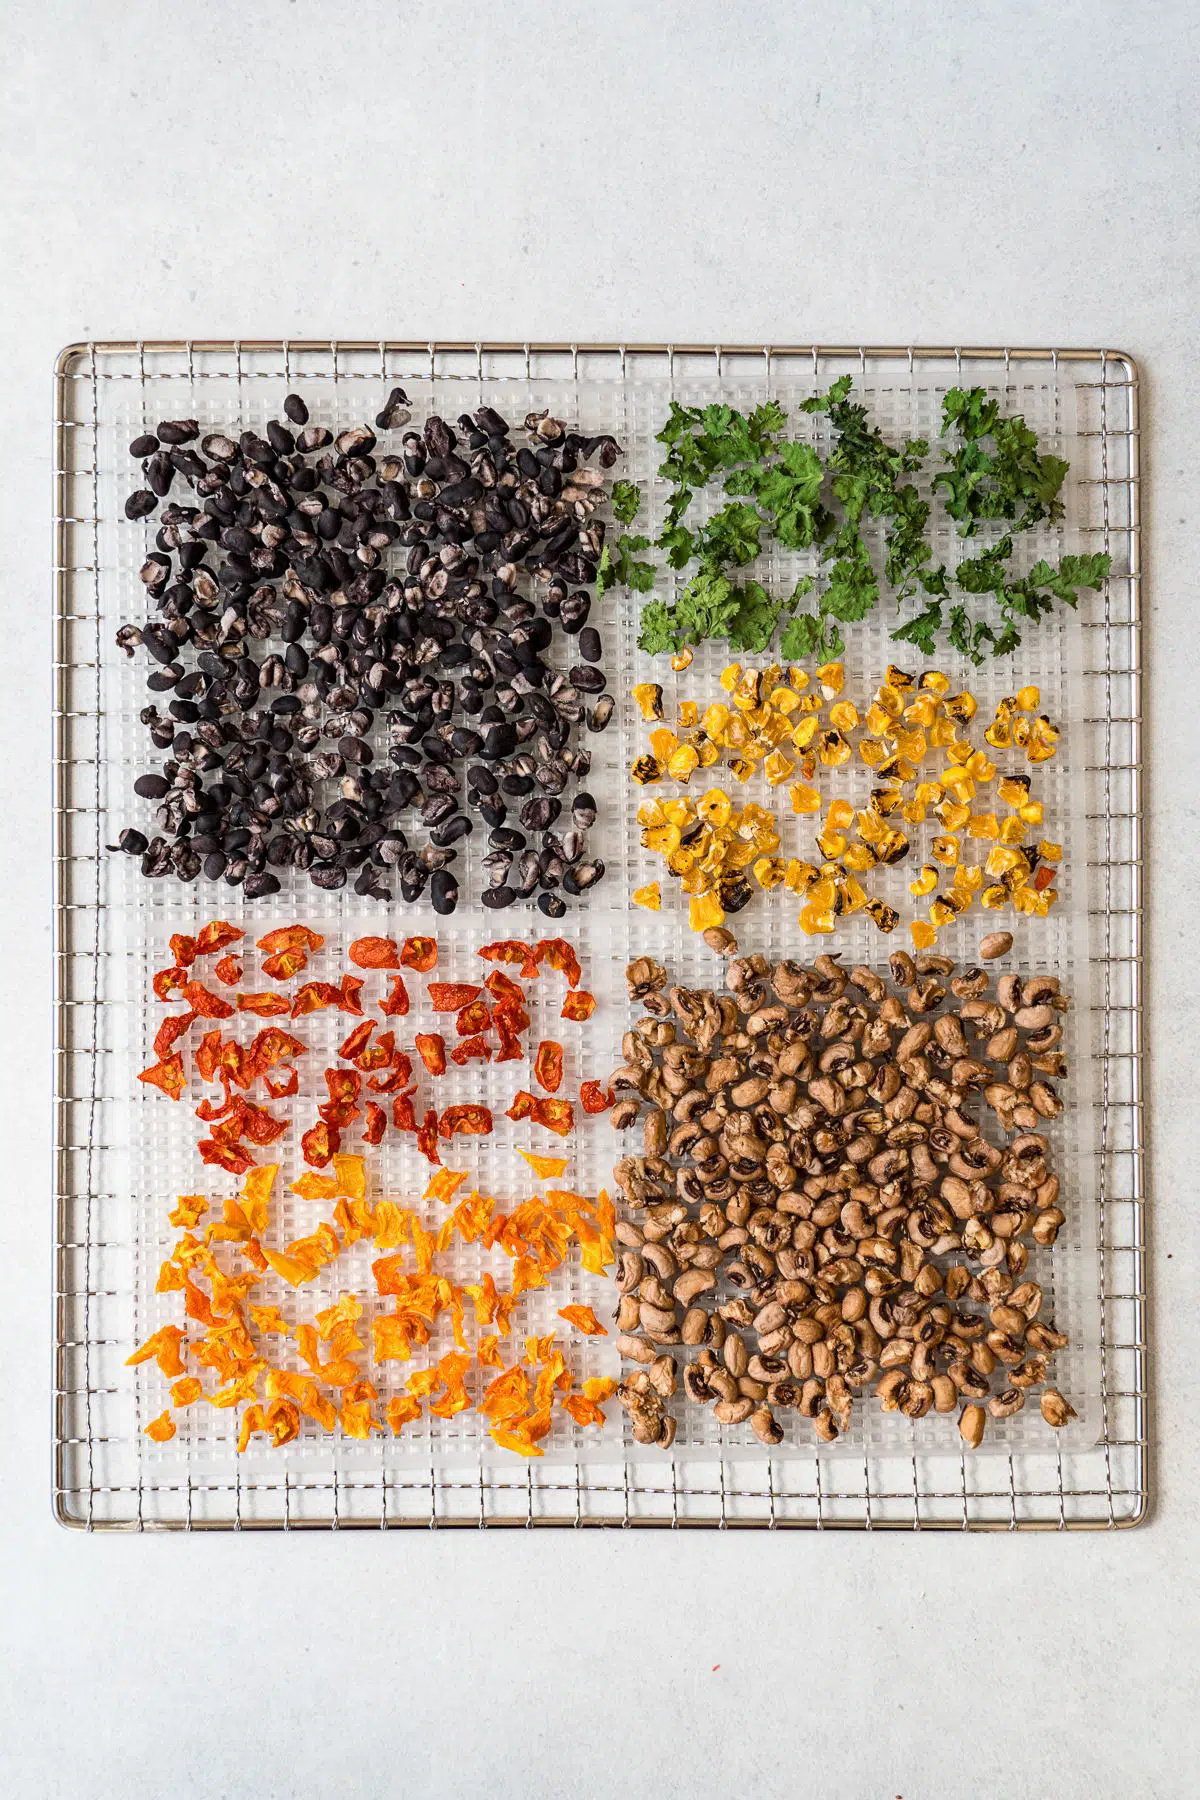 Dehydrated ingredients for cowboy caviar on a dehydrator tray